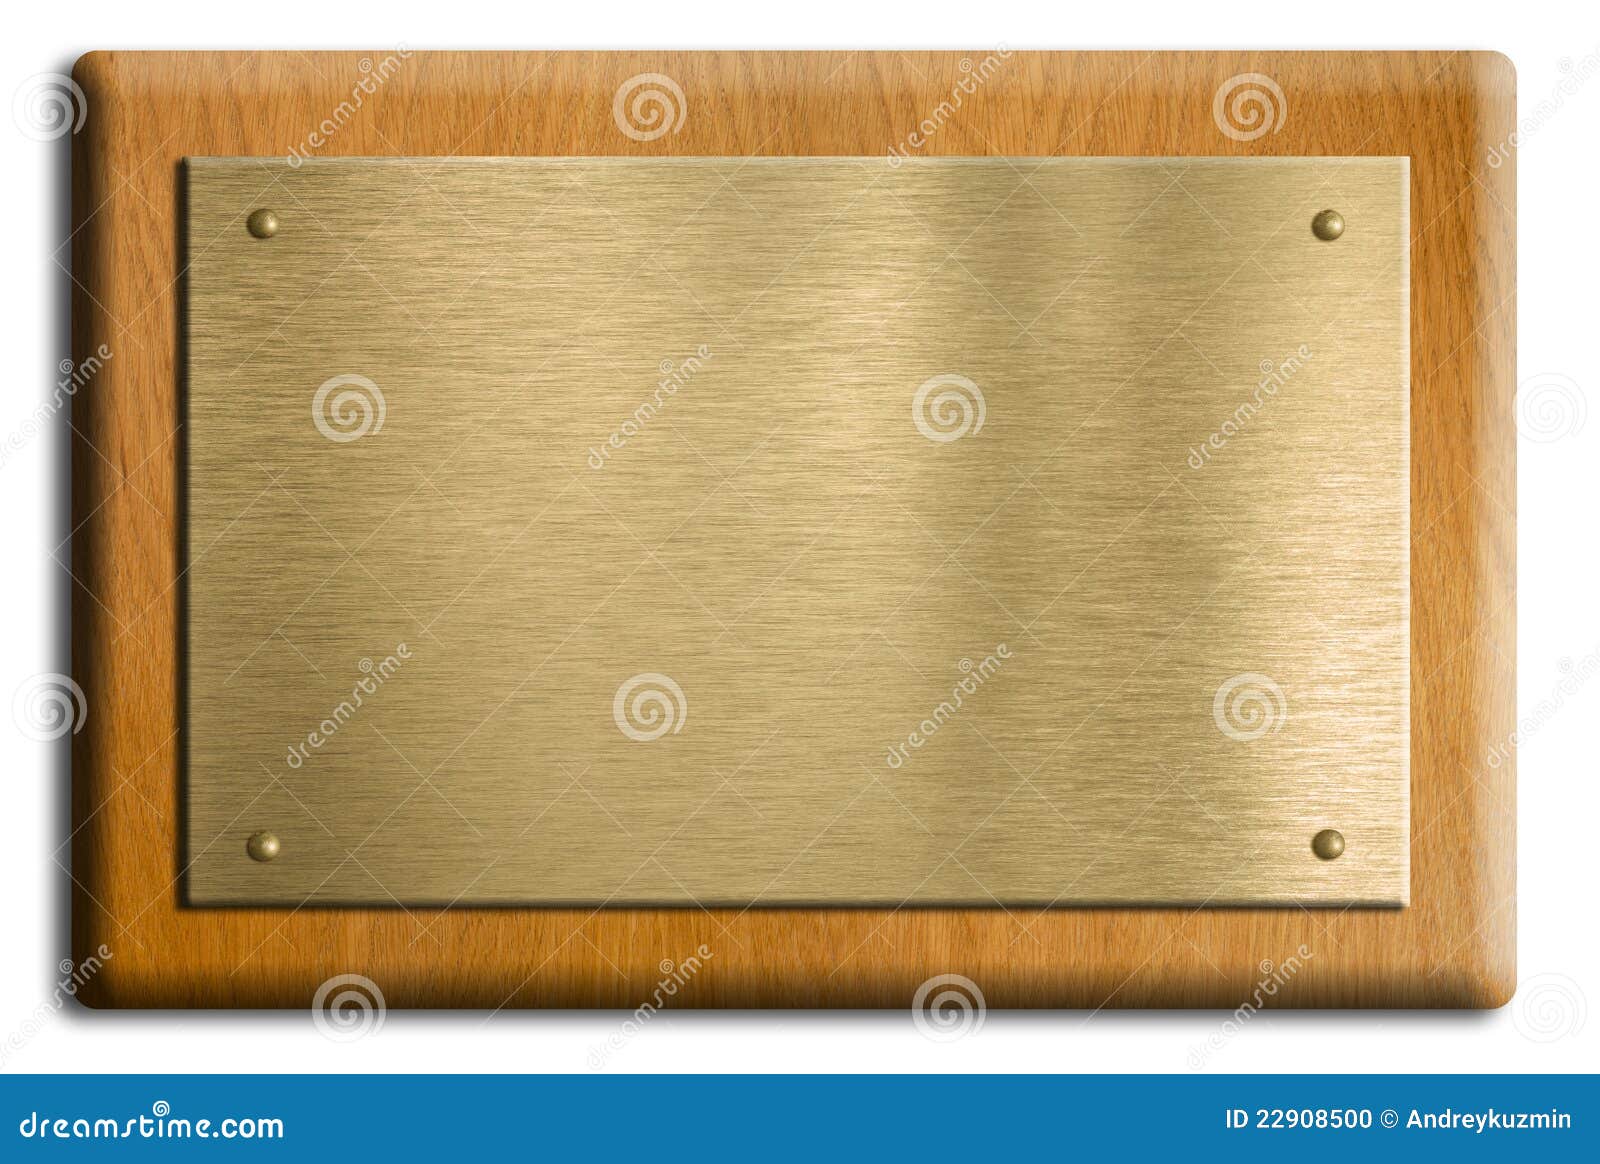 wooden plaque with gold or brass plate